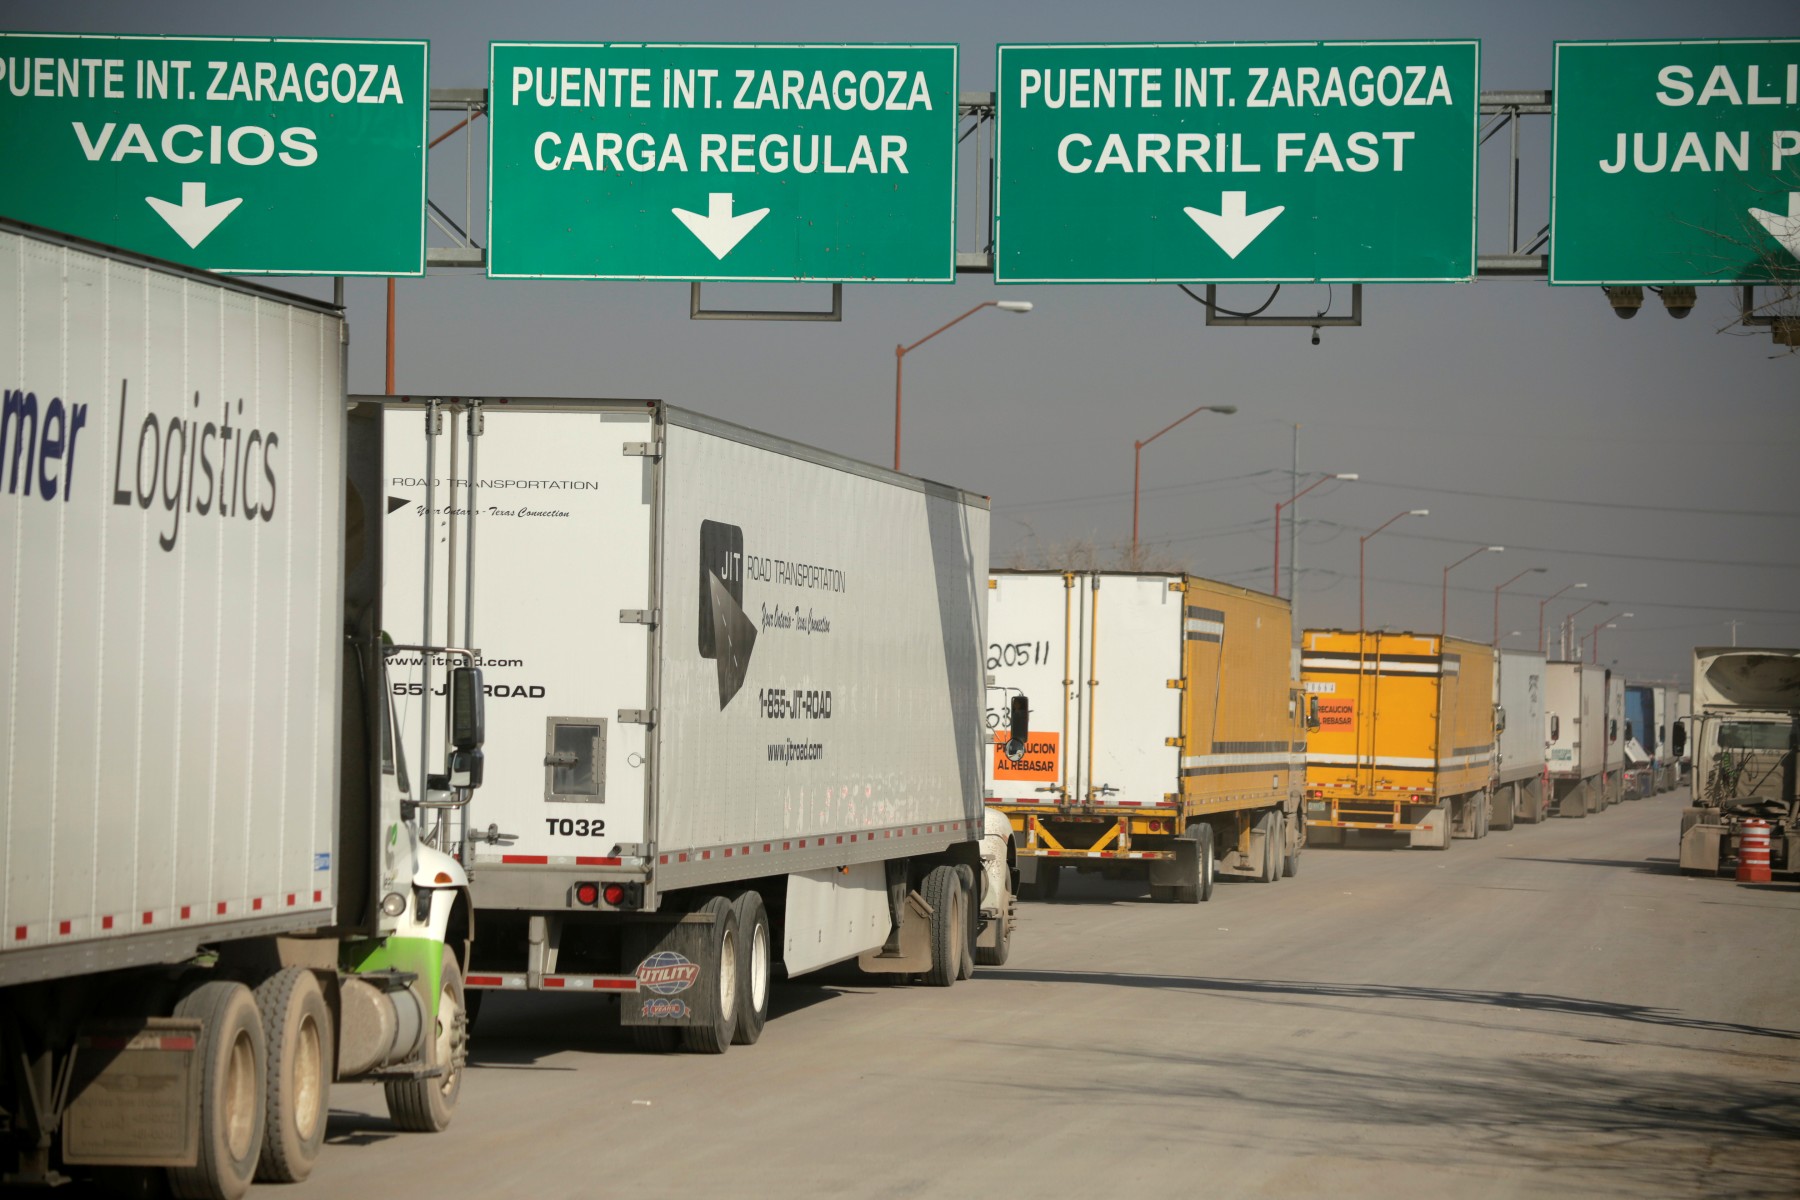 Exports in Juarez face obstacles